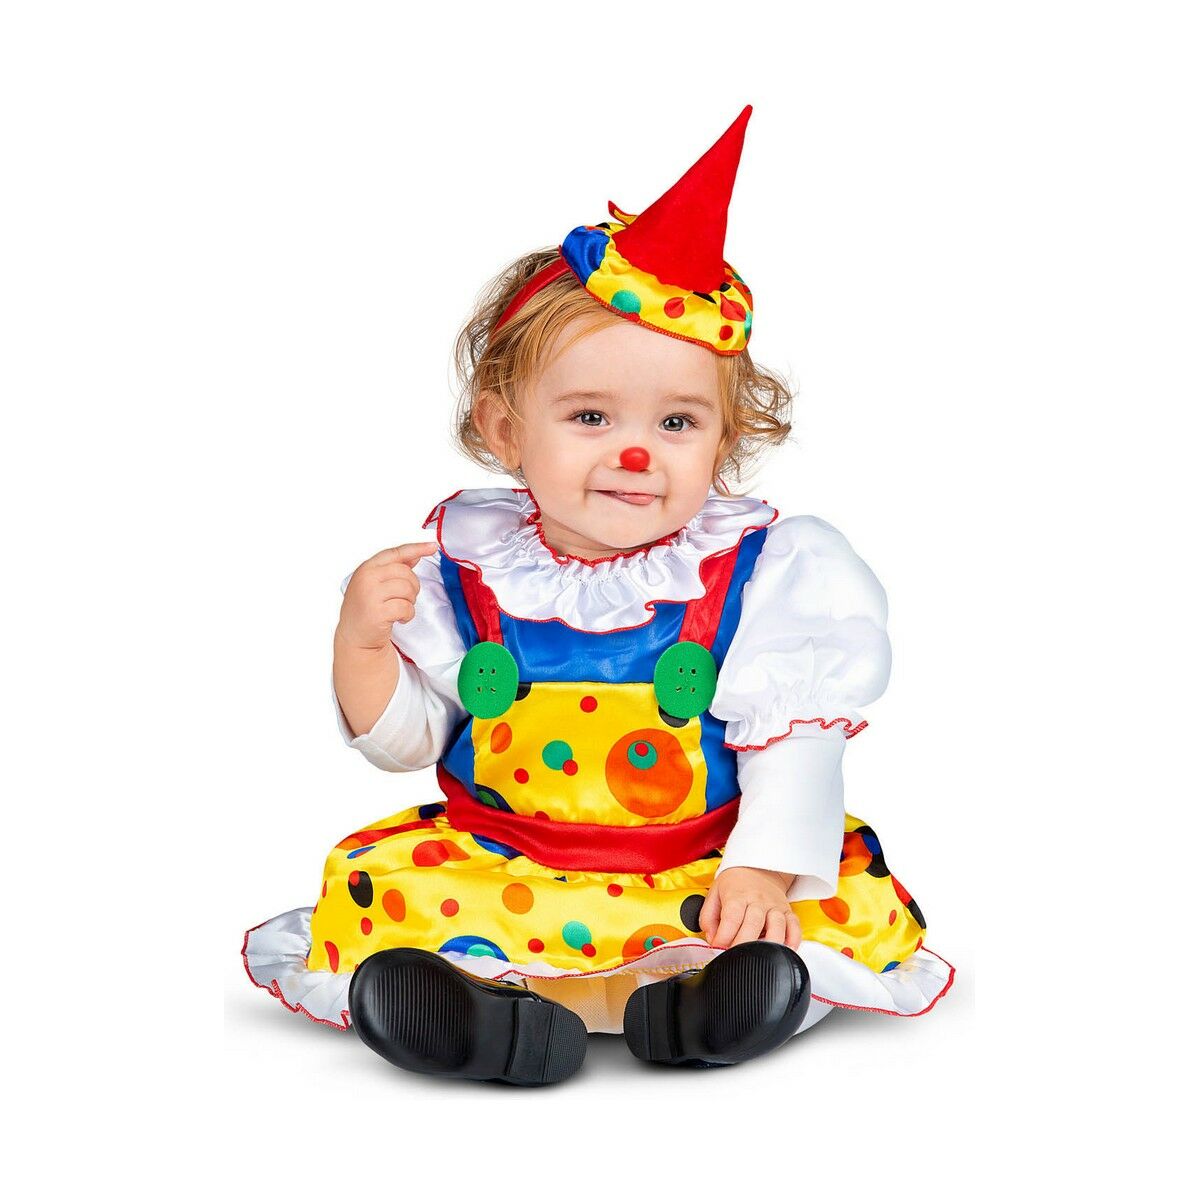 Costume for Babies My Other Me Female Clown 1-2 years (2 Pieces)